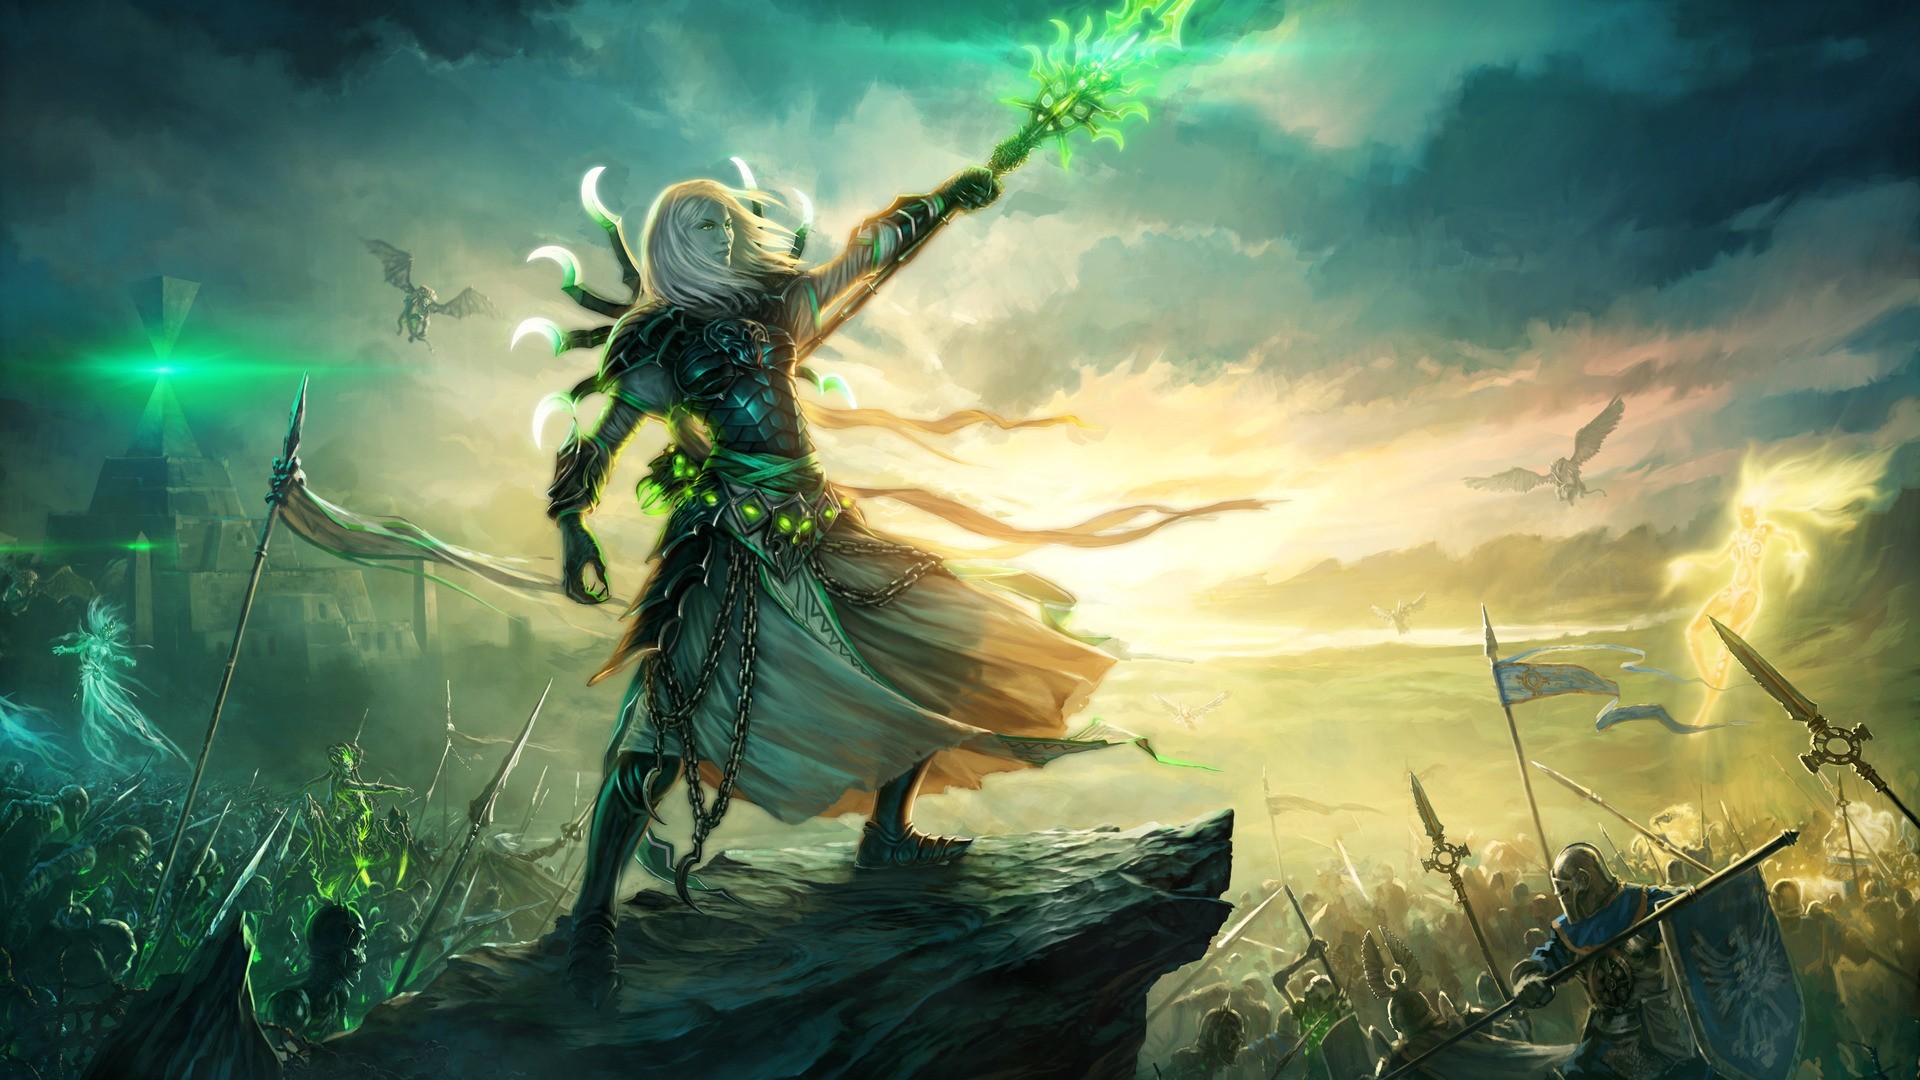 Fantasy Art Battle Magic Video Games Heroes Of Might And Magic 1920x1080